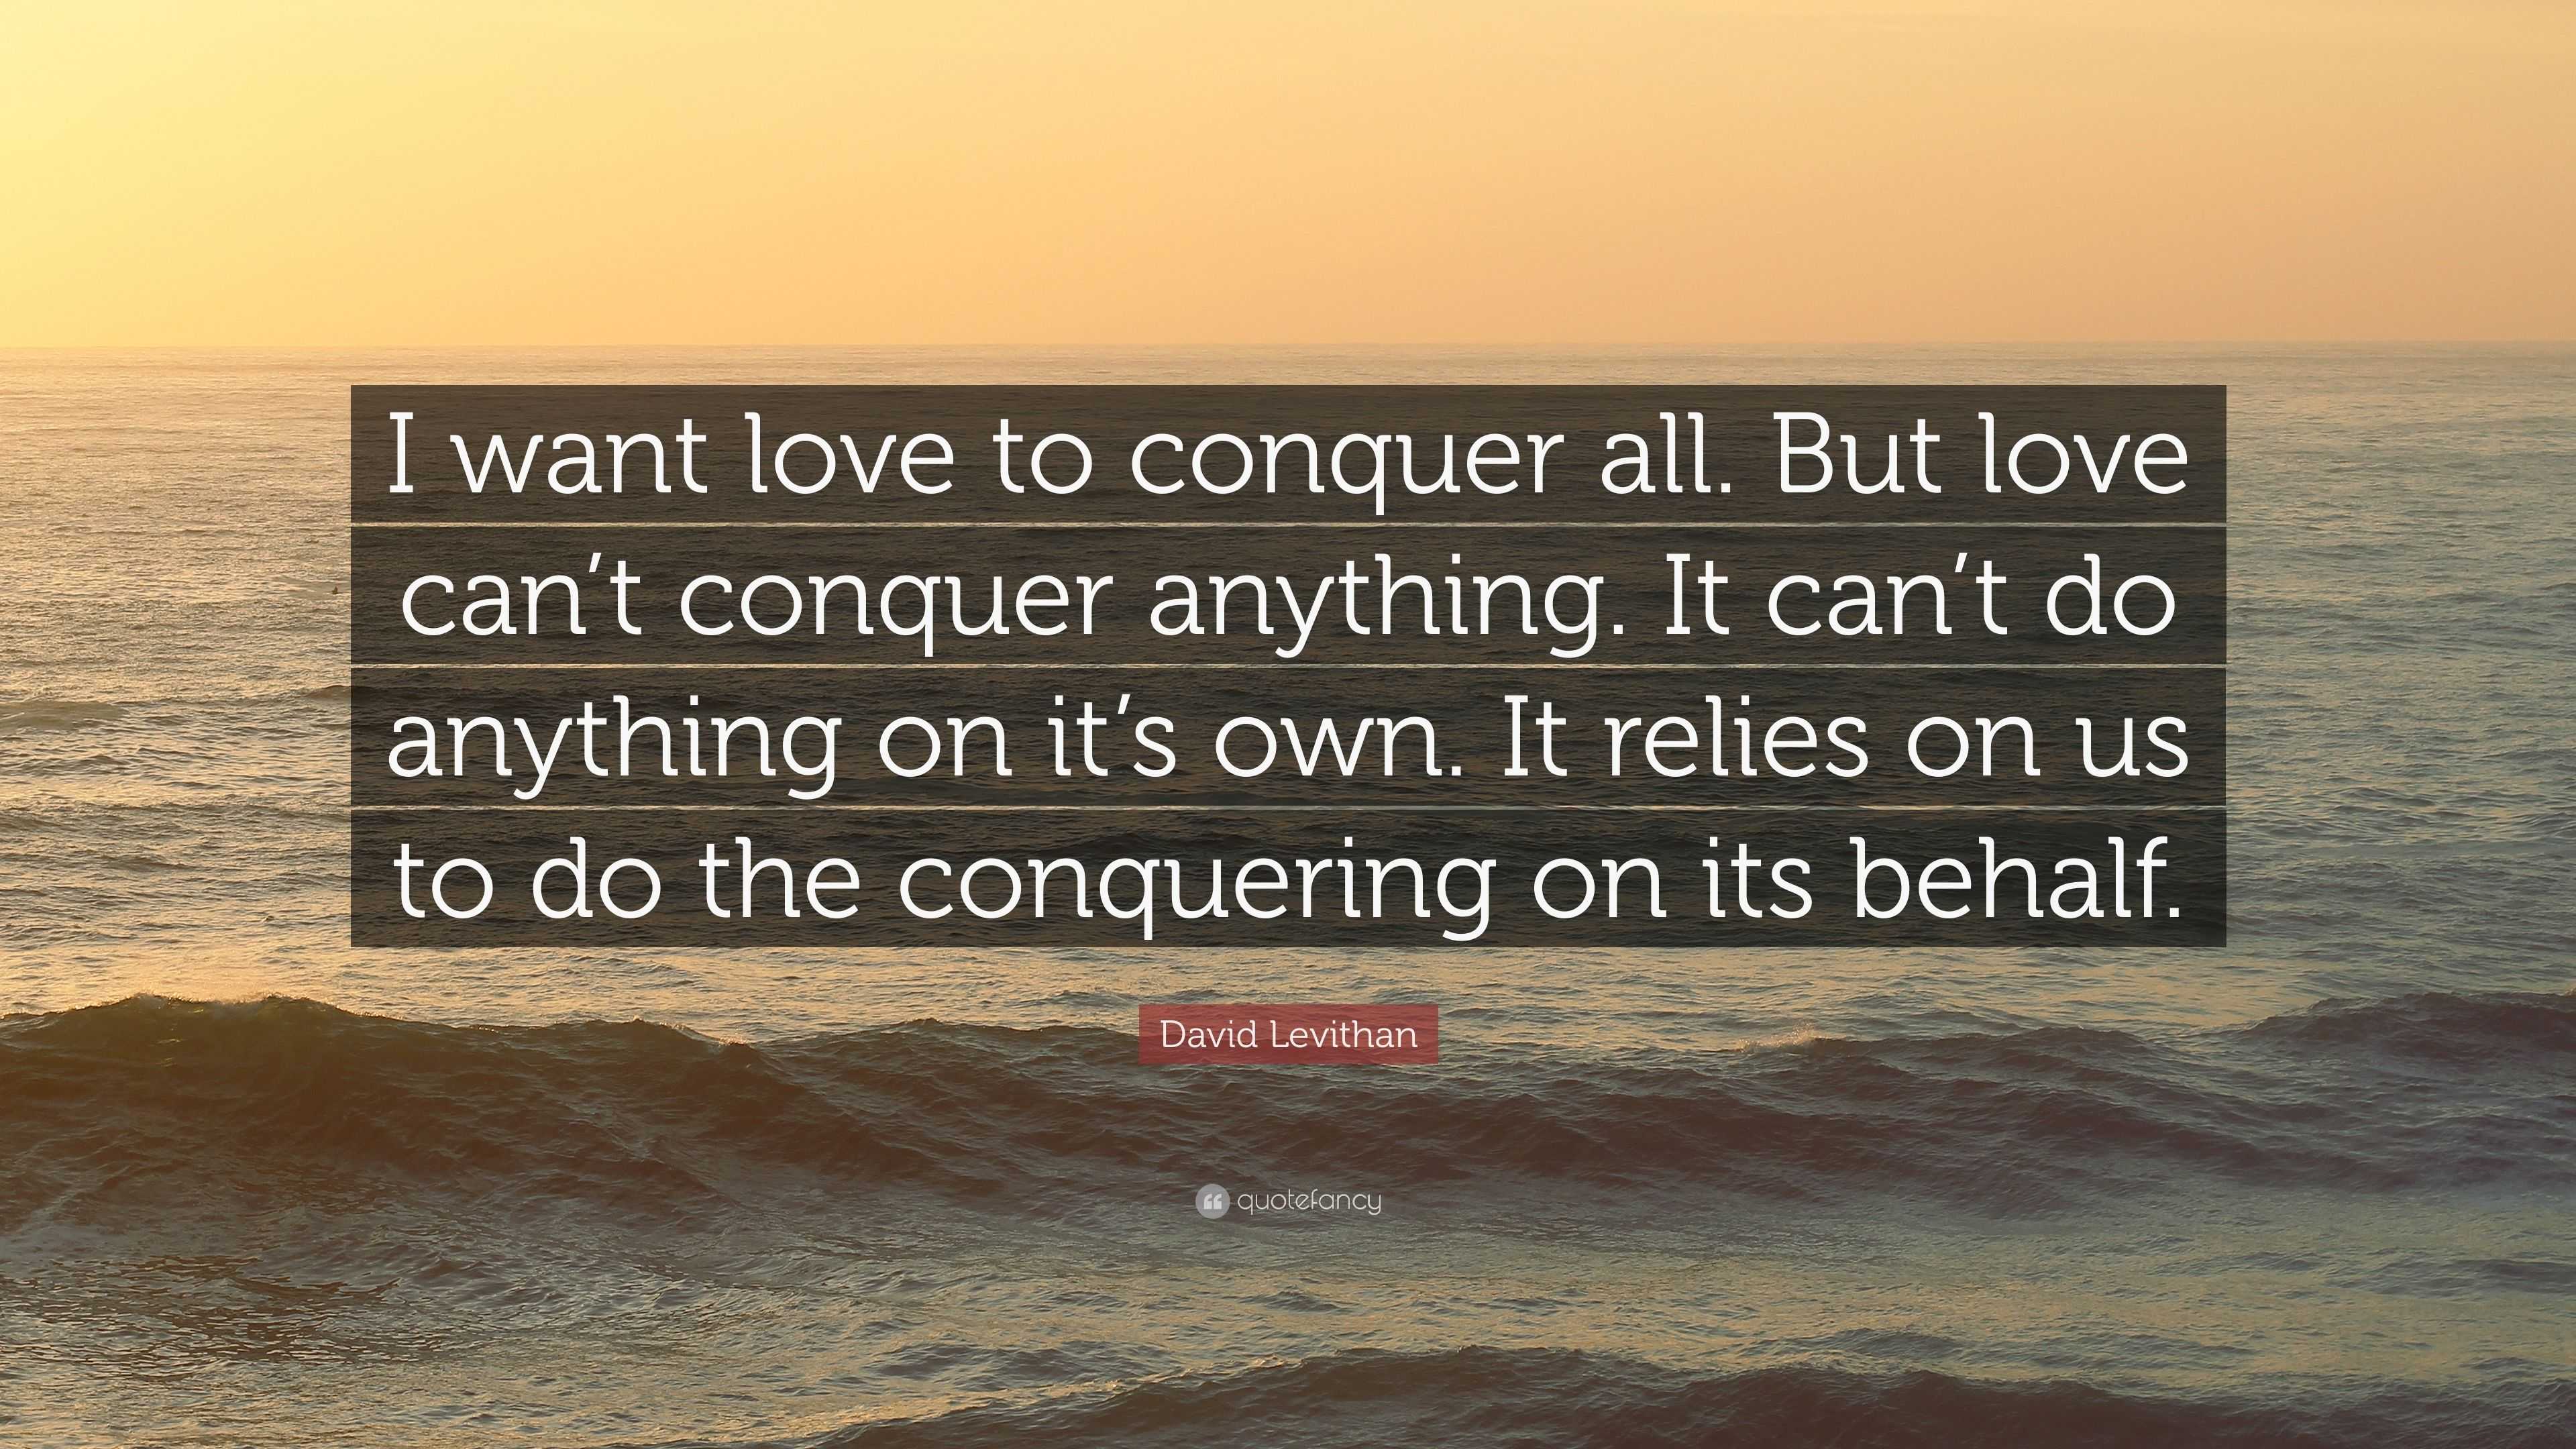 David Levithan Quote “I want love to conquer all But love can